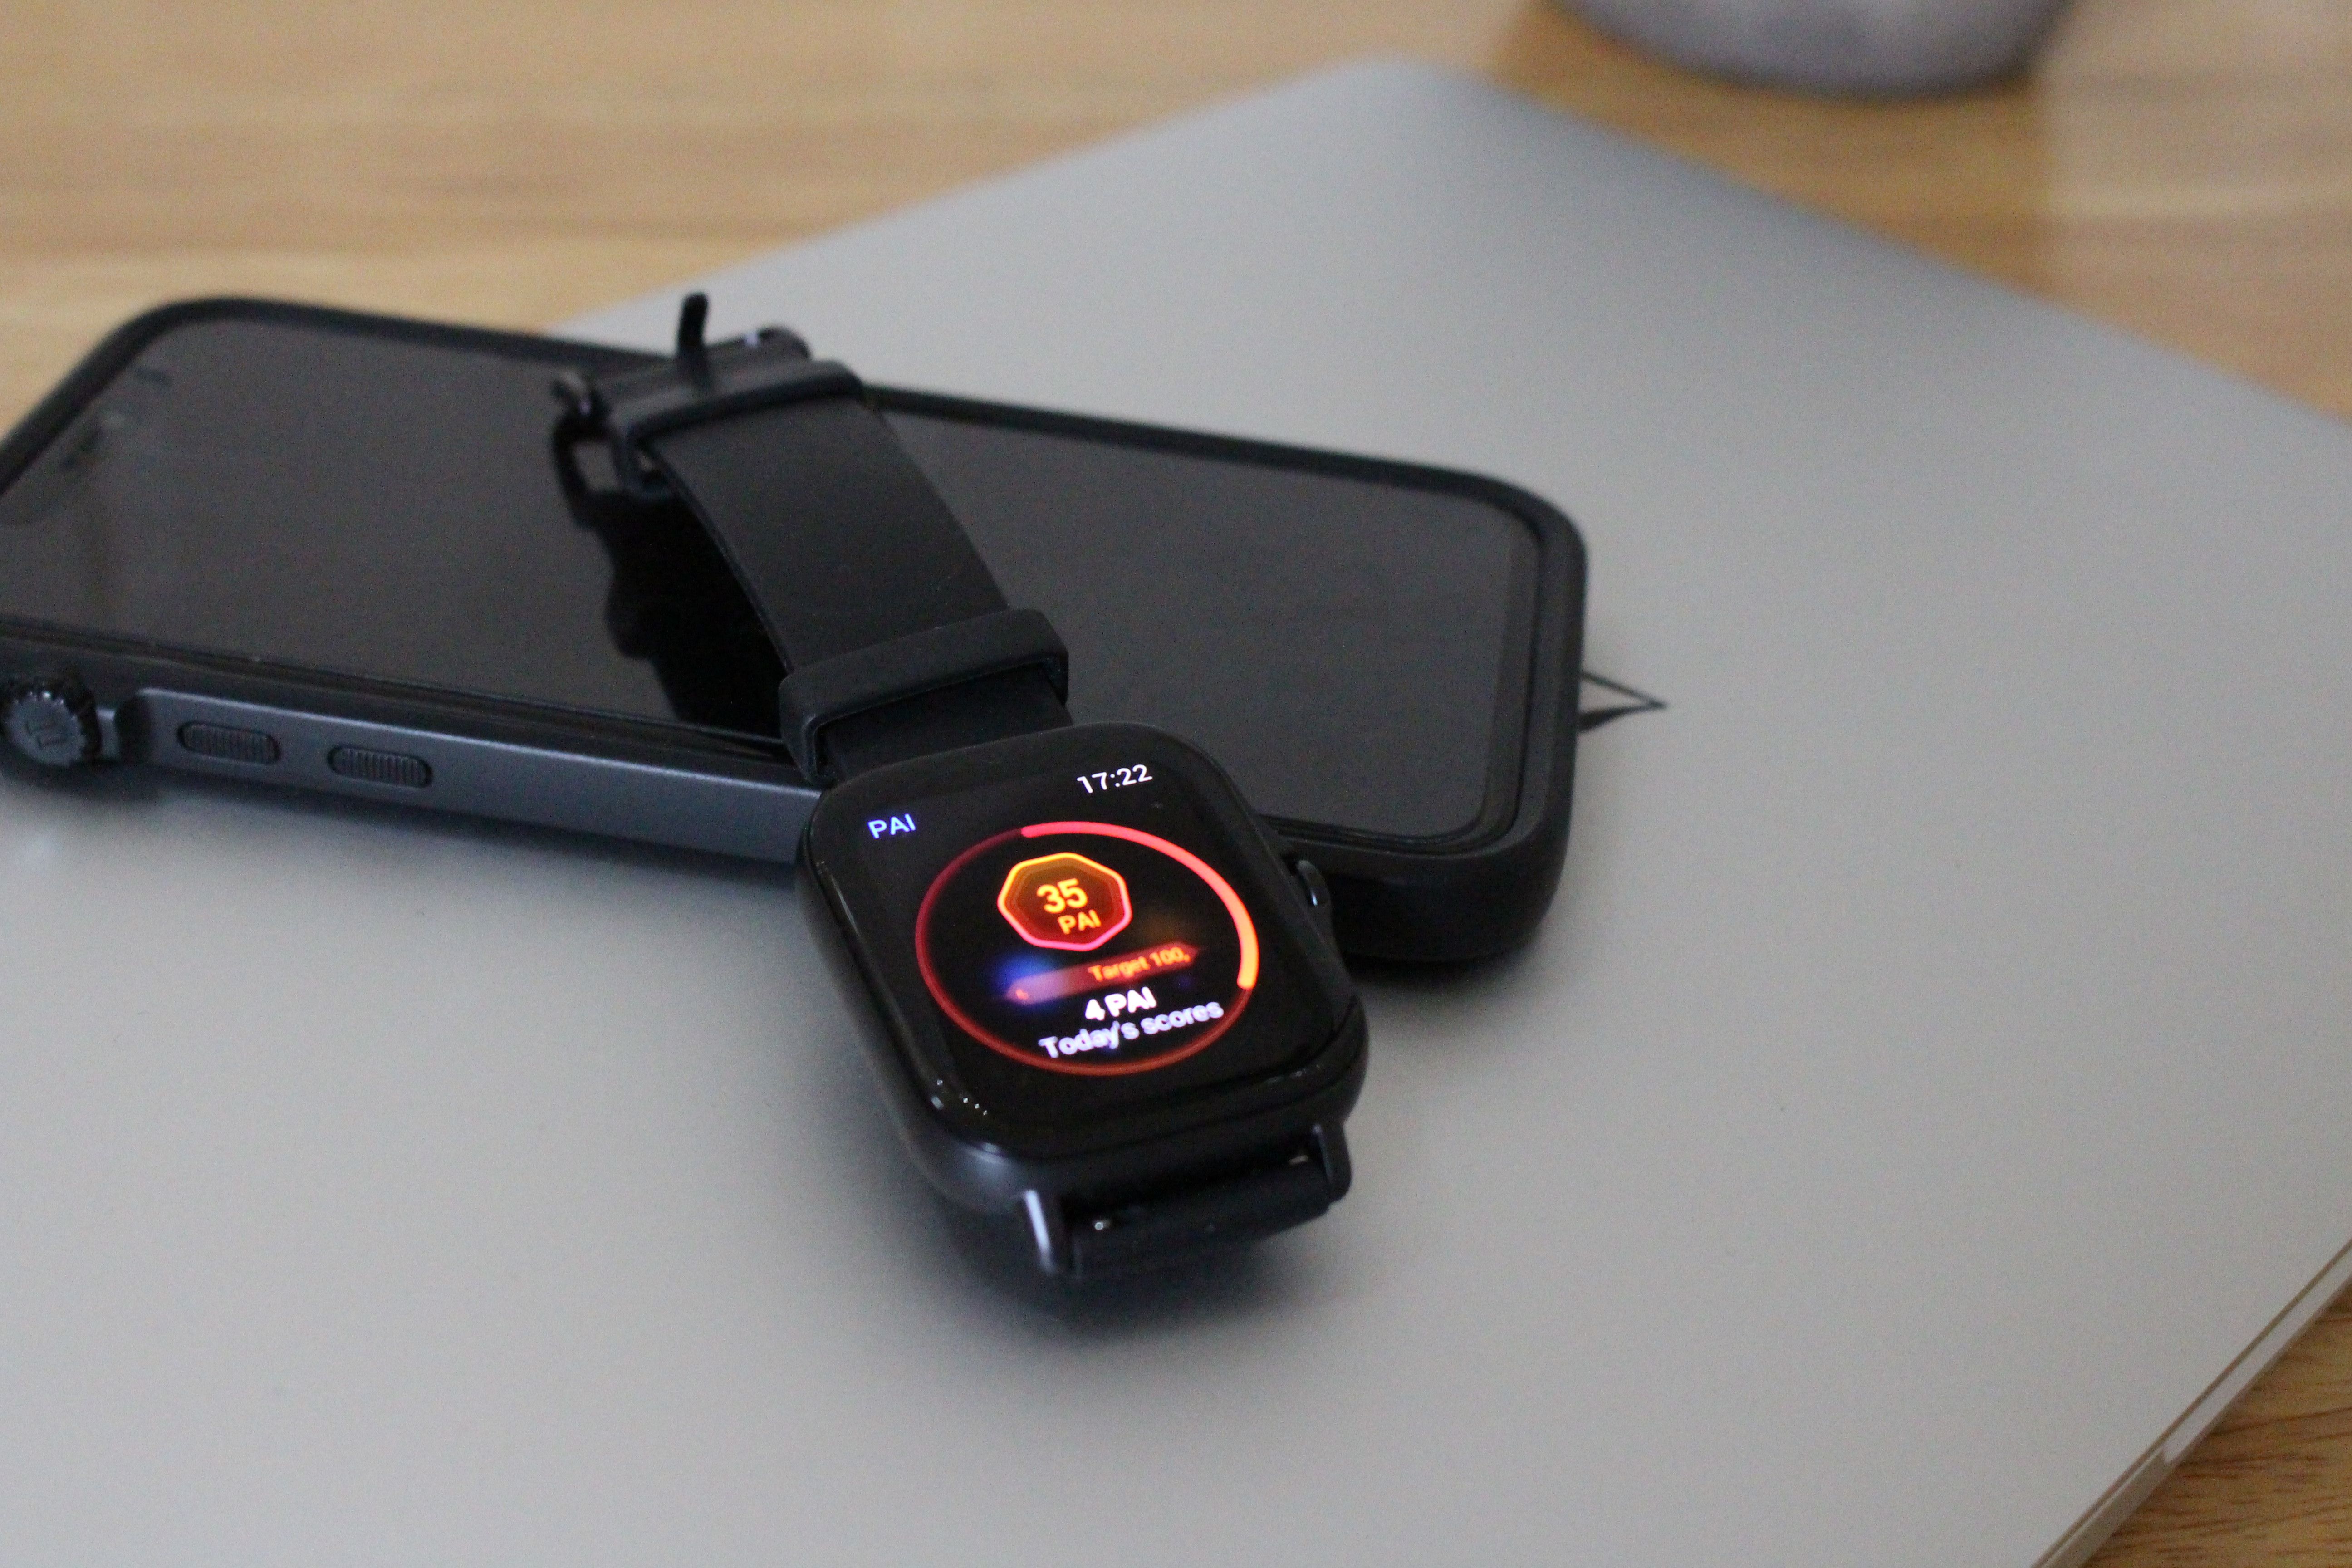 Amazfit GTS 2e on top of a smartphone